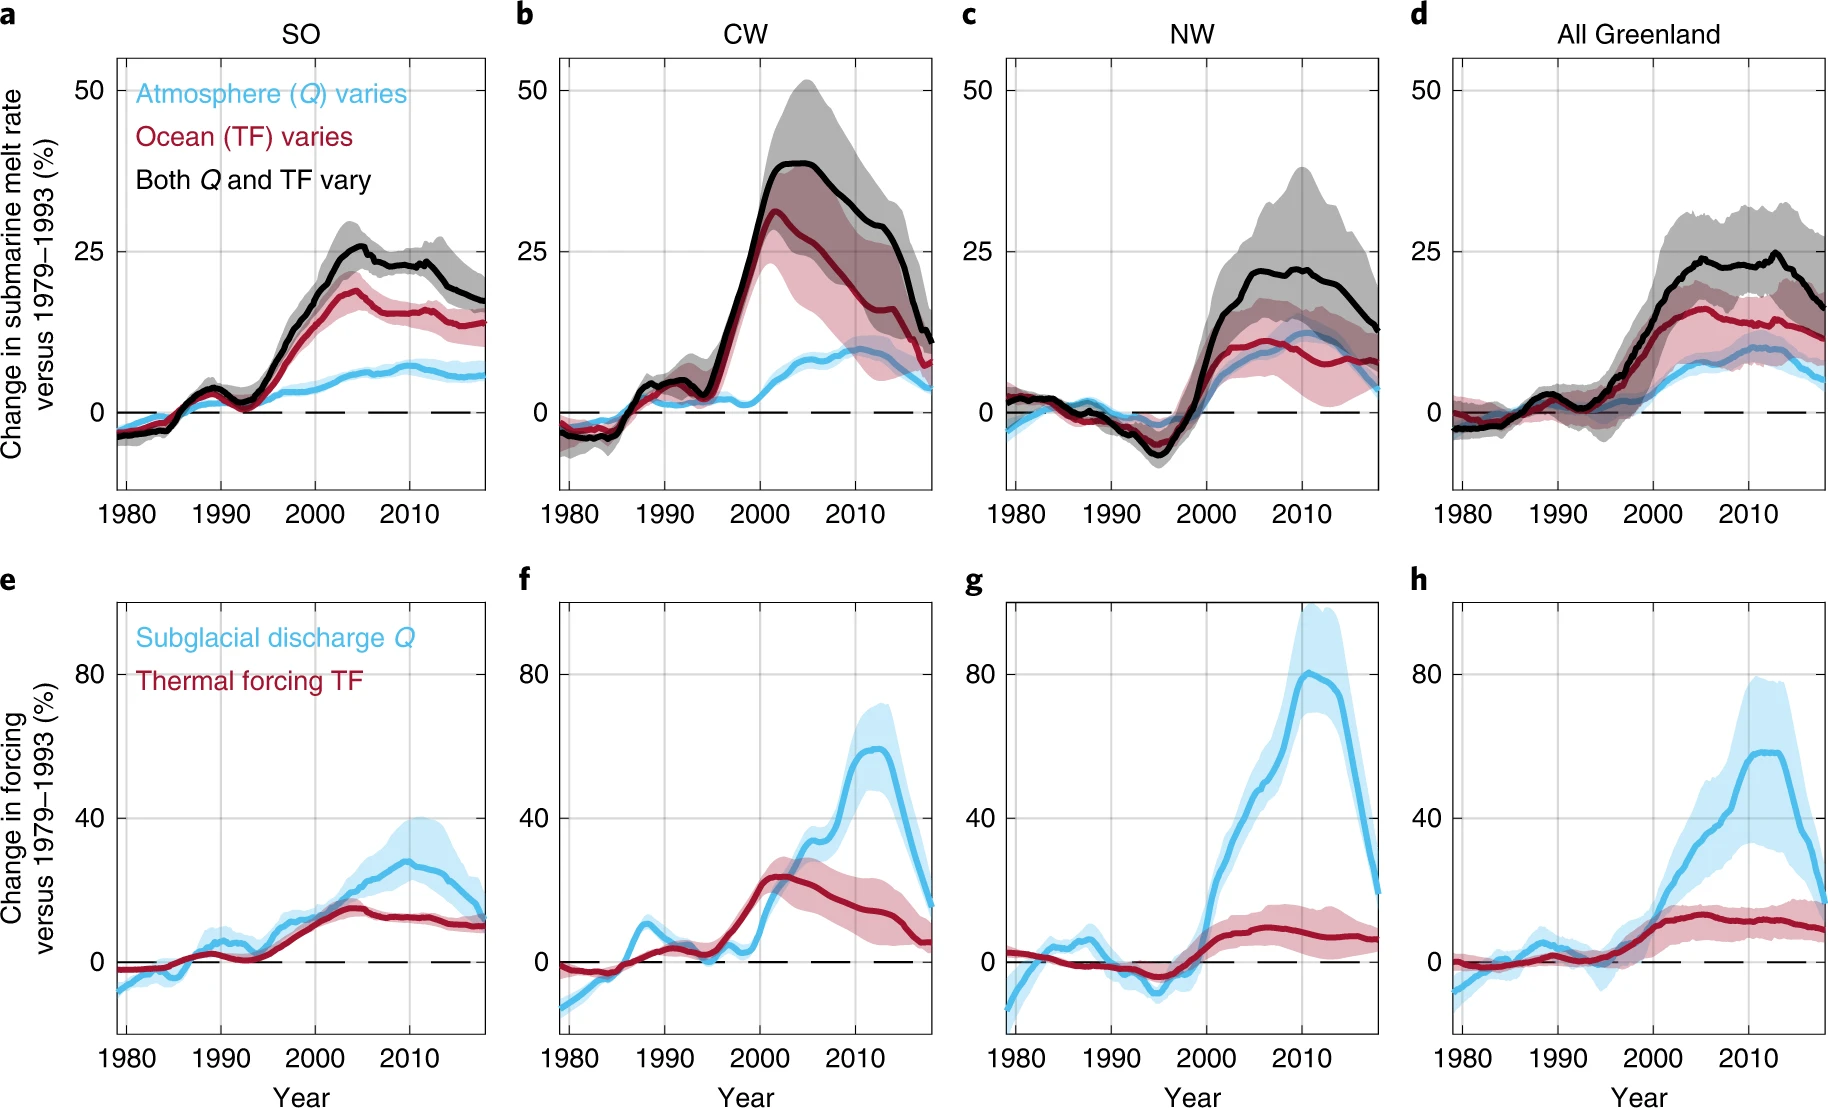 (a–d) Regional percentage change in annual submarine melt rate relative to the 1979–1993 mean accounting for only atmospheric variability (solid blue), accounting for only oceanic variability (solid red) and accounting for both atmospheric and oceanic variability (solid black) for SO (a), CW (b), NW (c) and all Greenland (d). (e–h) Percentage change in annual subglacial discharge (blue) and annual ocean thermal forcing (red) relative to the 1979–1993 mean for SO (e), CW (f), NW (g) and all Greenland (h). In all plots the lines show the median value over all marine-terminating glaciers in the region, while the shading shows the interquartile range. The fact that this shading is relatively narrow shows that all glaciers in a region experience similar variability in forcing. All time series have been smoothed using a ten-year window. Graphic: Slater and Straneo, 2022 / Nature Geoscience